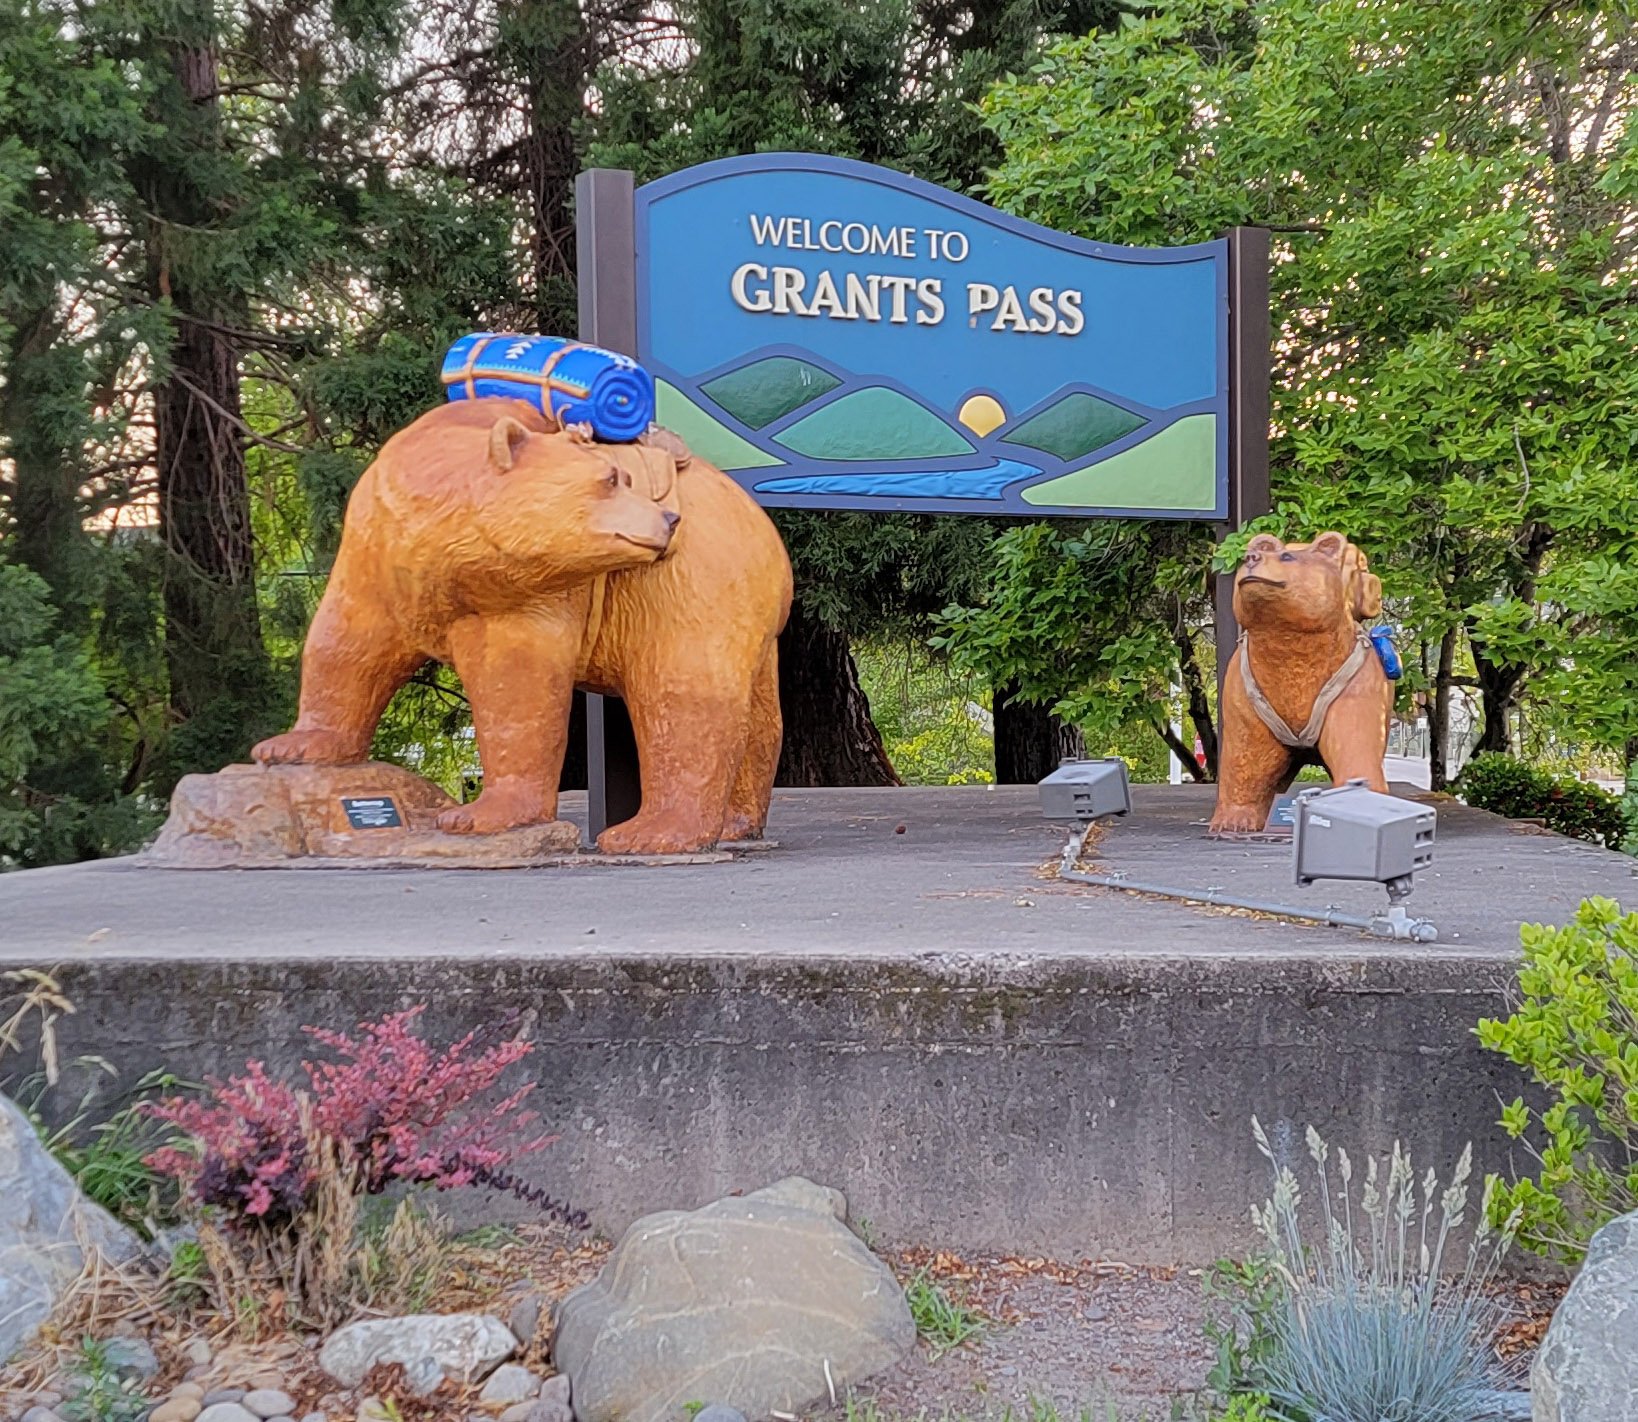  Once I was done with my 5 hour ride, I just drove over the mountain to Grants Pass. Sort of a last minute plan to go inland instead of up the coast back home. Hey, might as well since I’m here. 